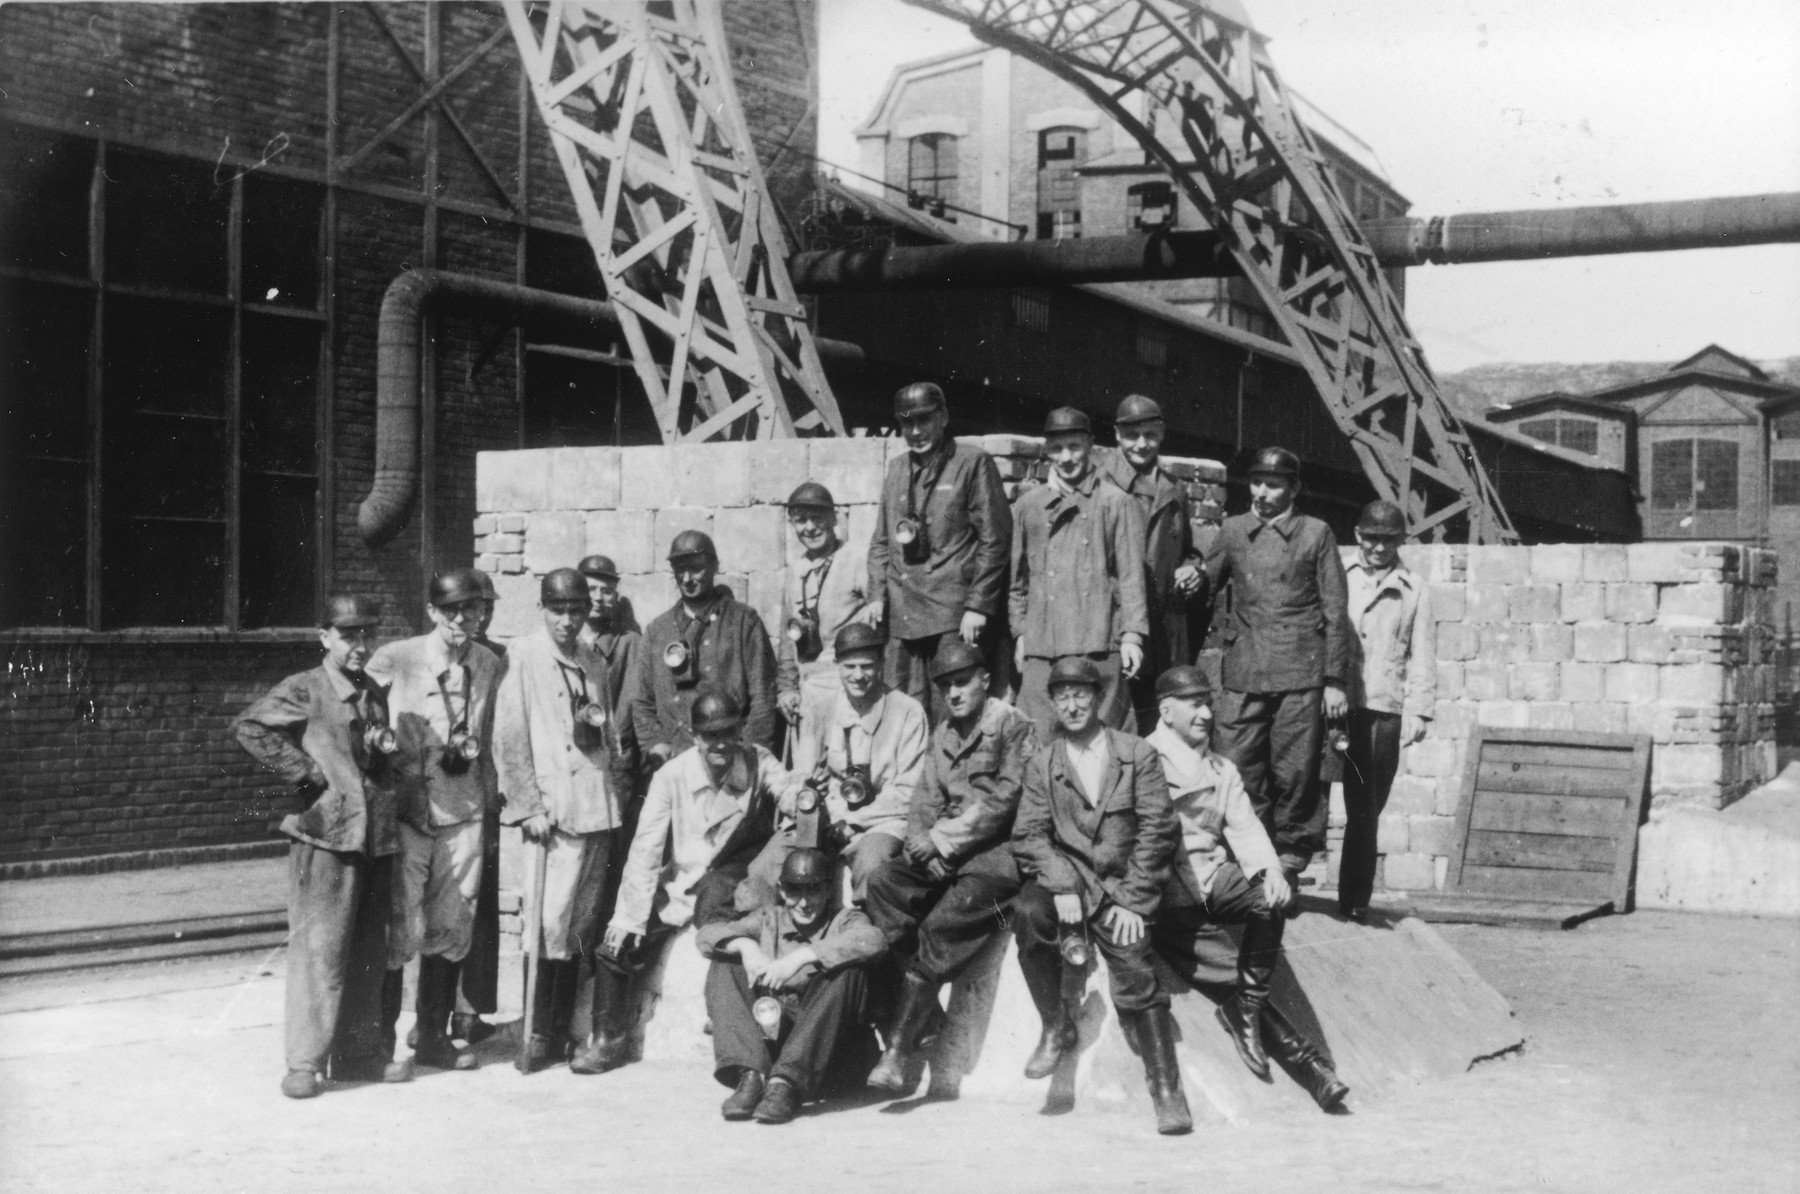 A large group of SS medical personnel visit a coal mine near Auschwitz following the dedication of the SS Lazerette.

The original caption reads "Besichtigung eines Kohlenbergwerks." (visiting a coal mine).

Seated in the front center is Gerhard Gerber.  Seated behind him (left to right) are Waldemar Wolter, possibly Weber, Alfred Trzebinski, Richard Trommer, and Fritz Klein.  Standing left to right are Willy Frank, unidentified, Wilhelm Witteler, unidentified, Max Blancke, Karl Hoecker, Enno Lolling, Eduard Wirths, Heinz Baumkoetter and Sohatz.